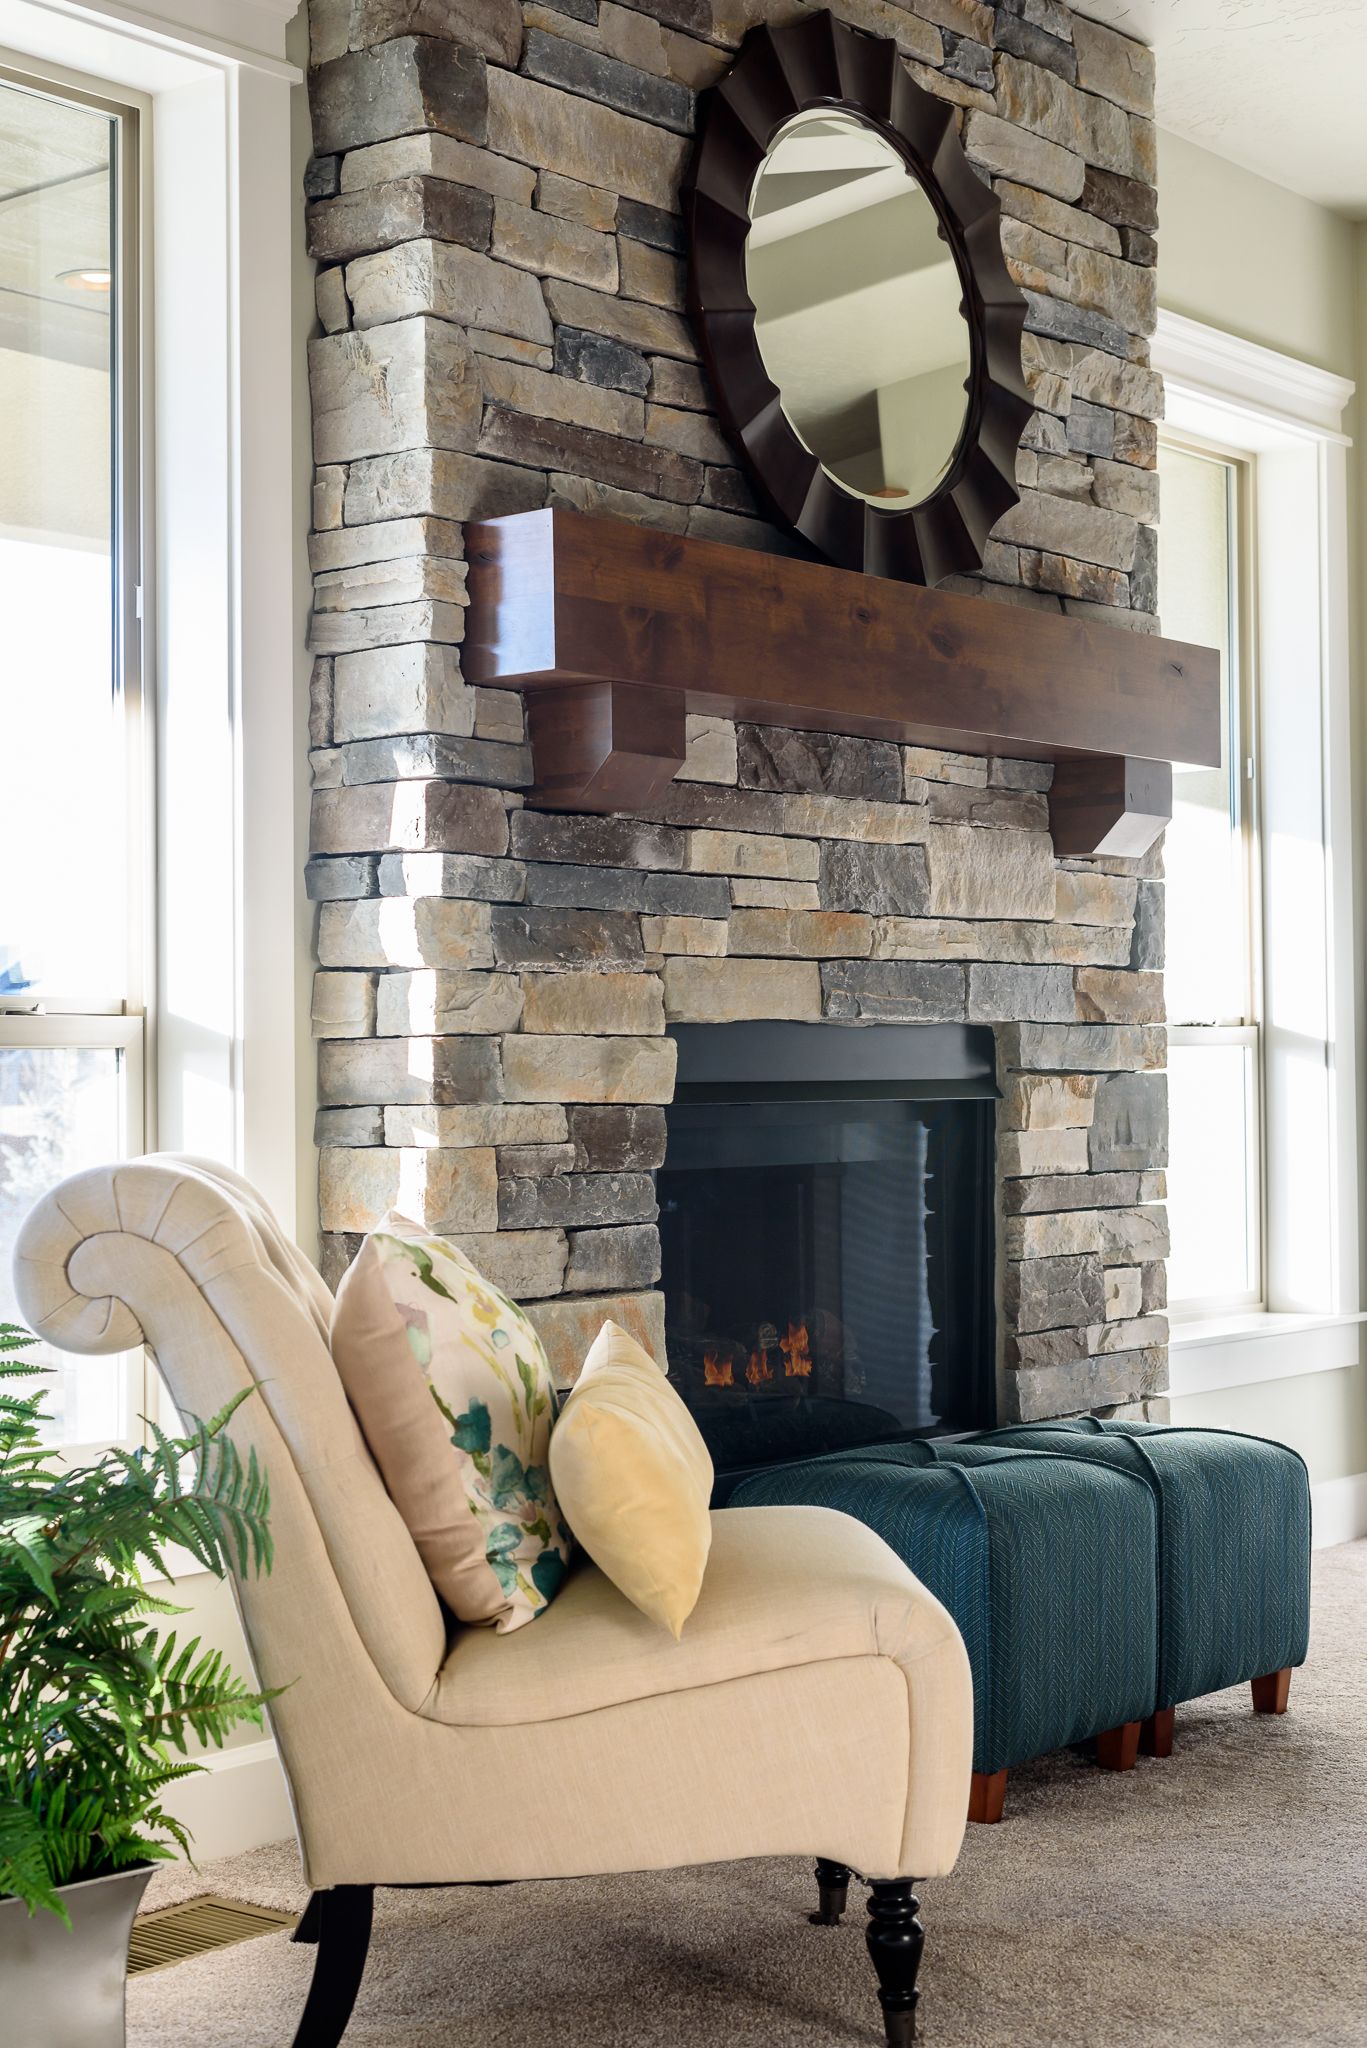 Driftwood Fireplace Mantel Best Of Echo Ridge Country Ledgestone On This Floor to Ceiling Stone